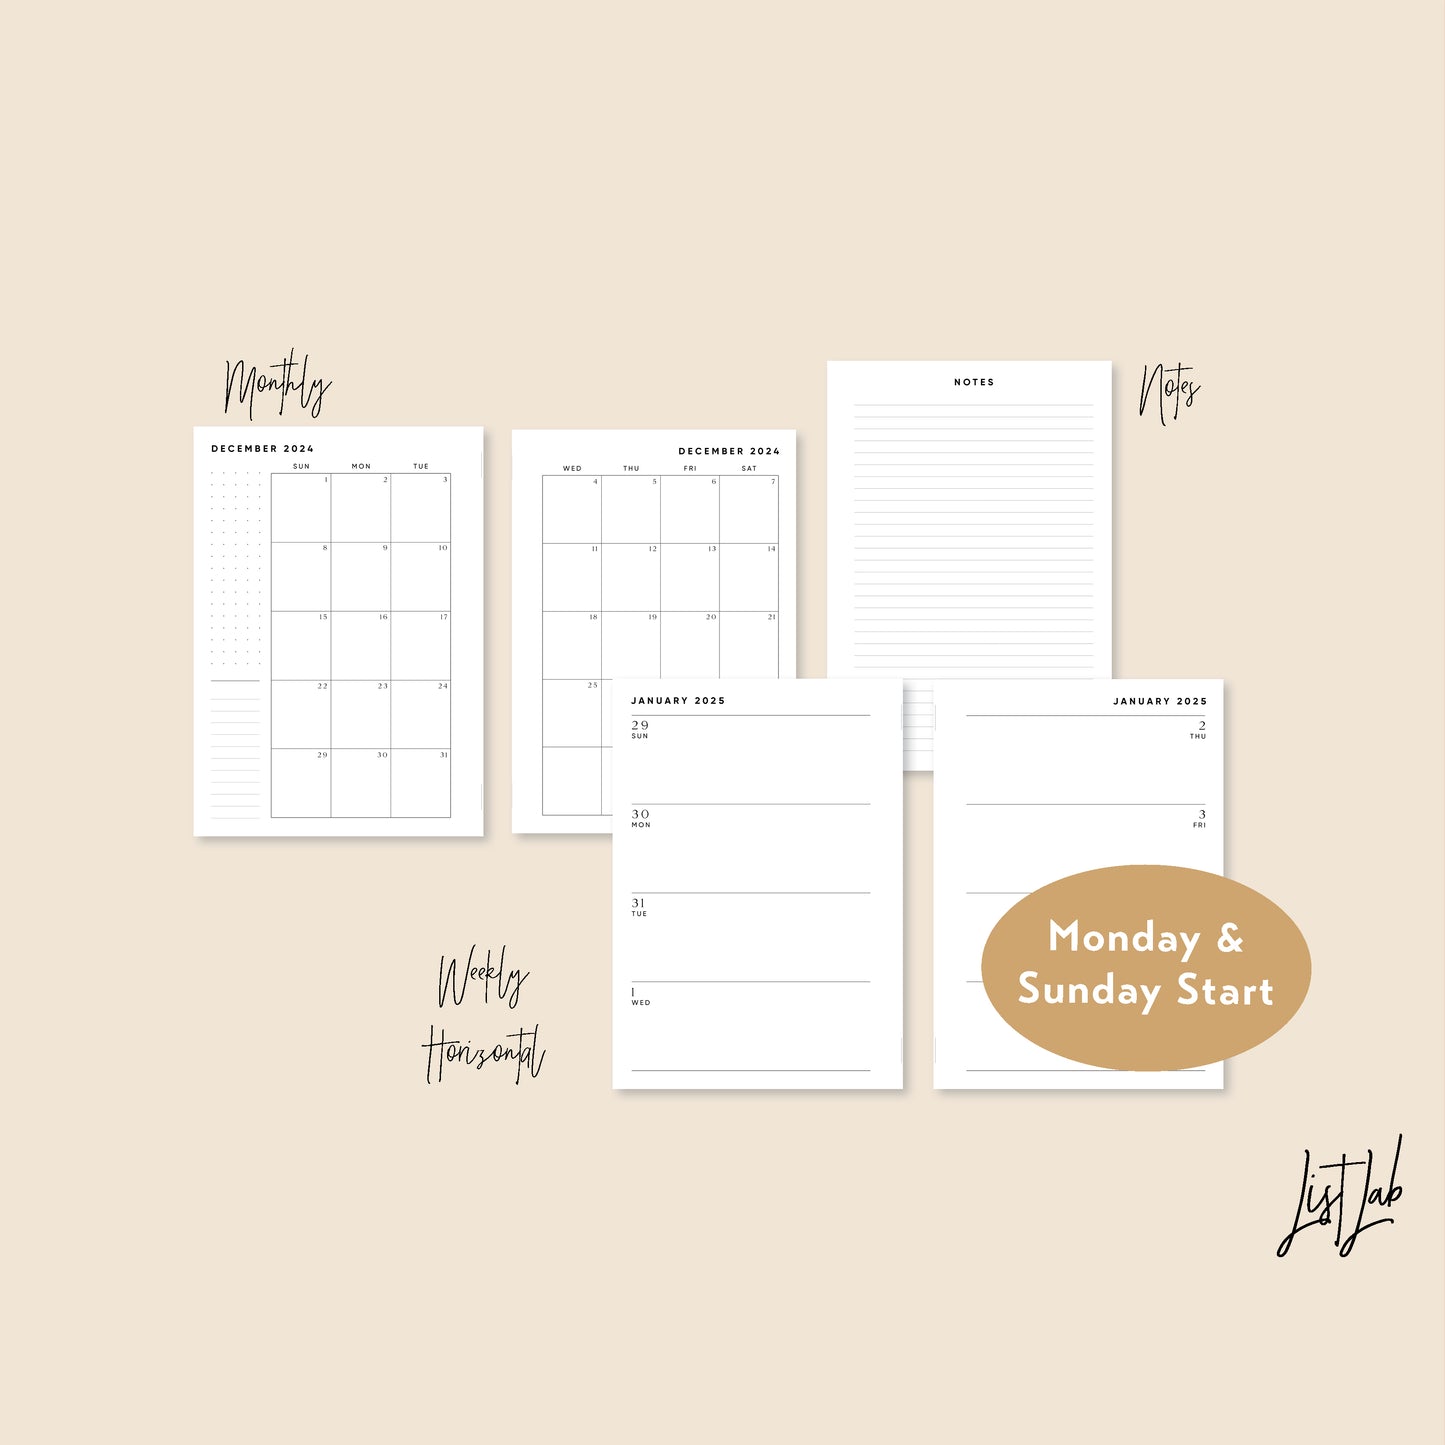 2024 Personal Wide Ring Yearly/Monthly/Weekly Horizontal Printable Set